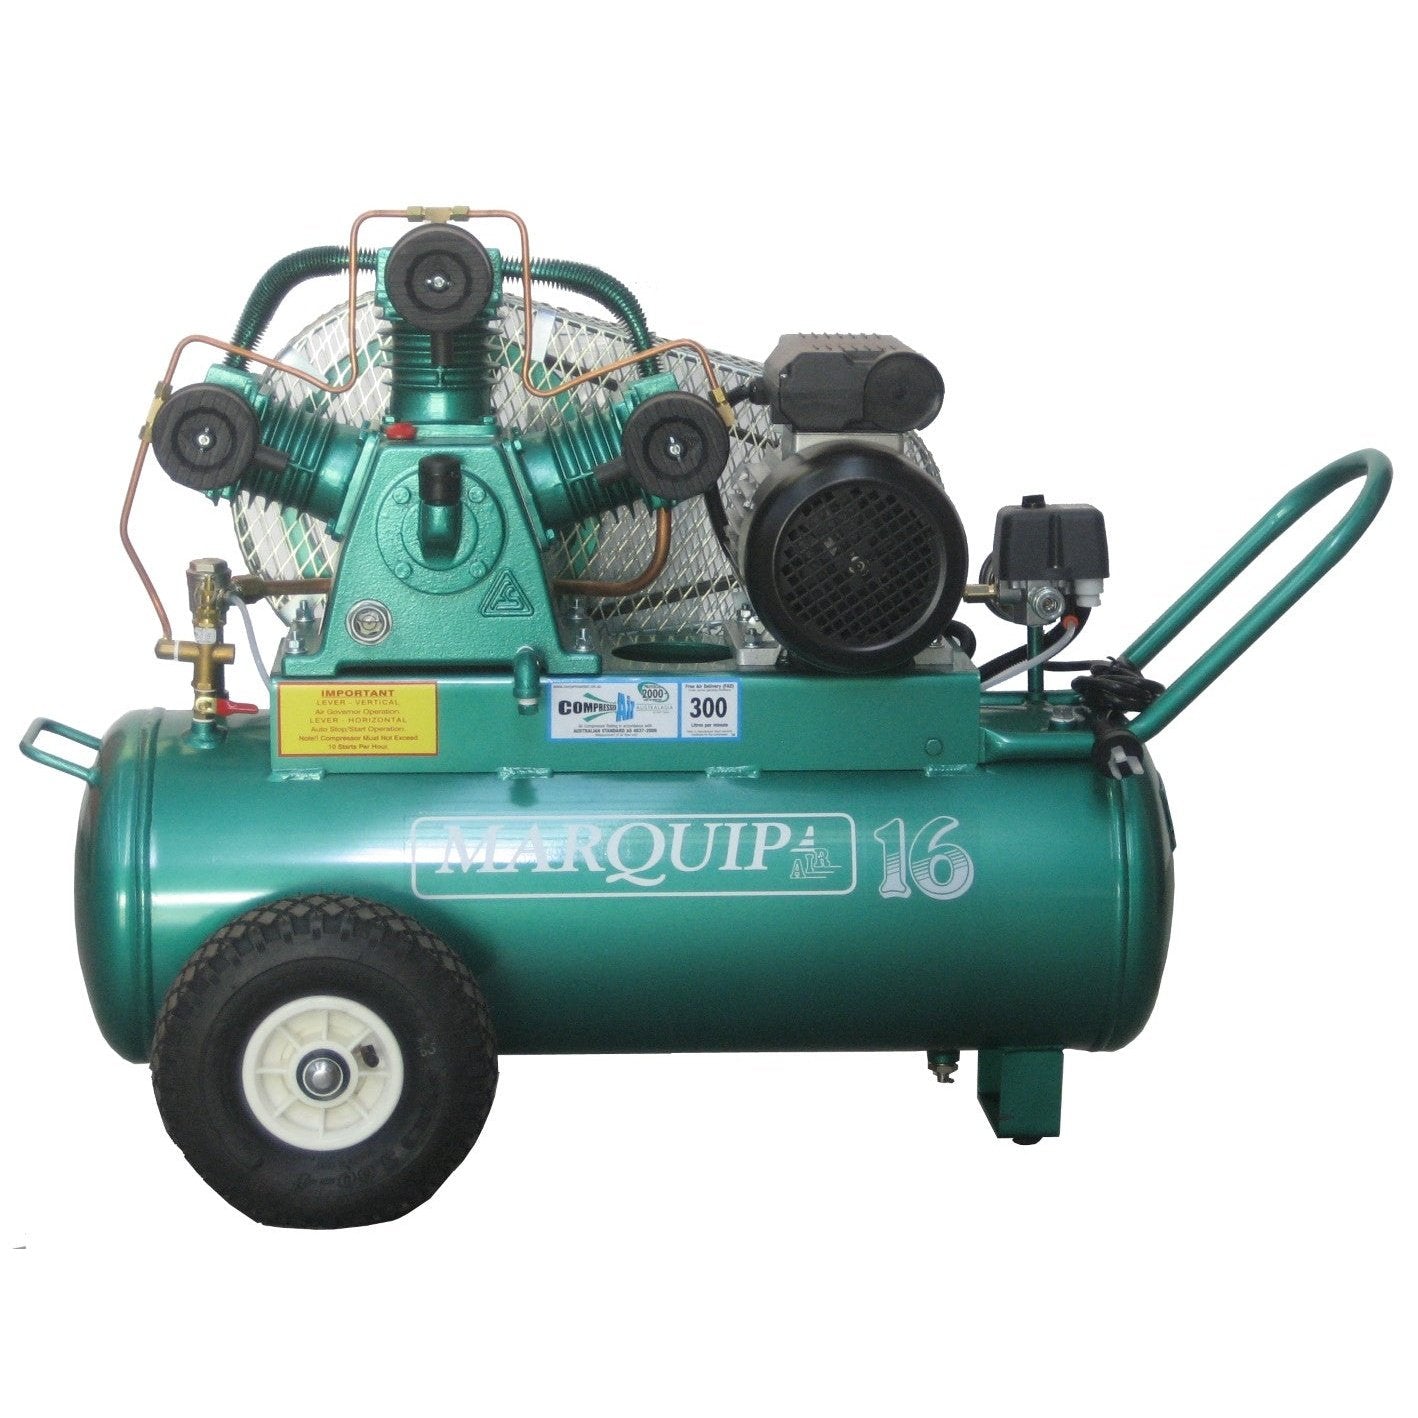 Marquip Industrial 16 2kW 2.7HP 50L 15A Single Phase Belt Drive Compressor tool-junction-nz